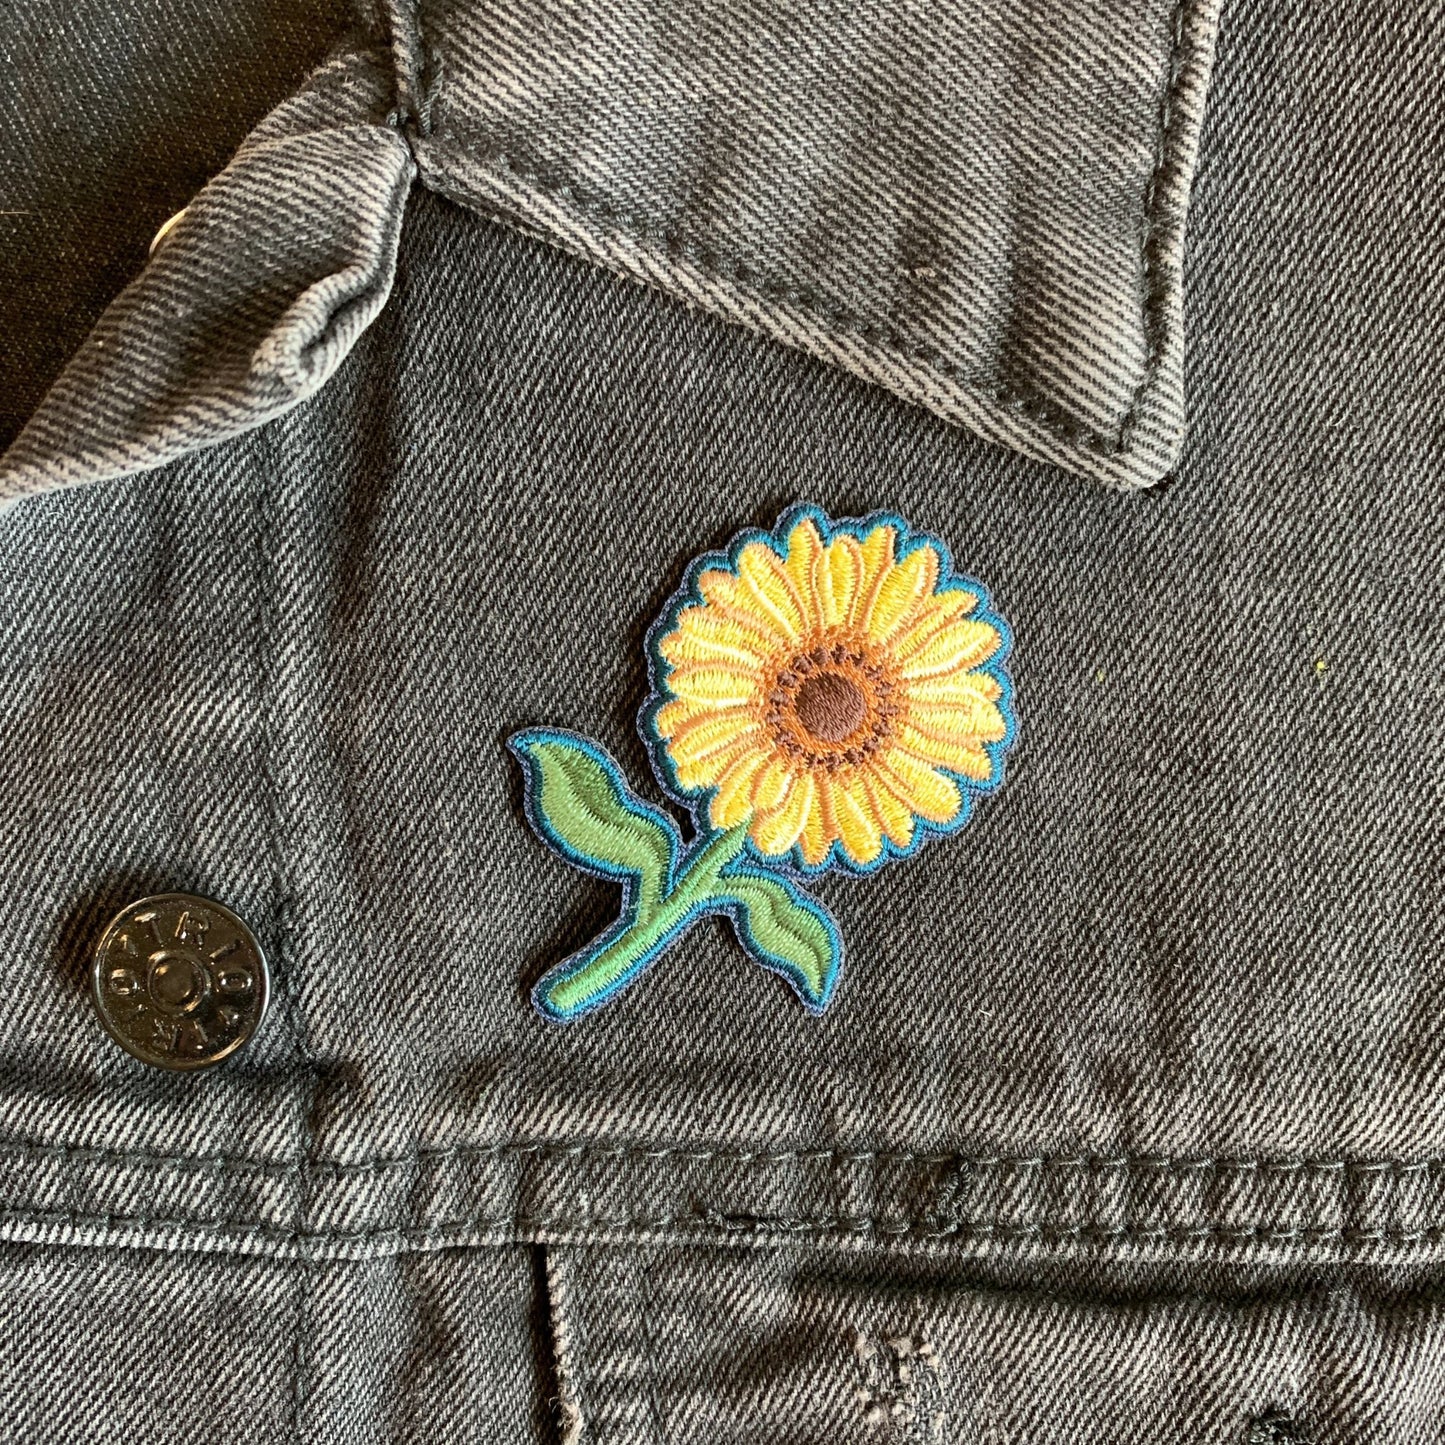 Long Stem Sunflower Iron On Patch | Botanical Plant Embroidered Floral Applique